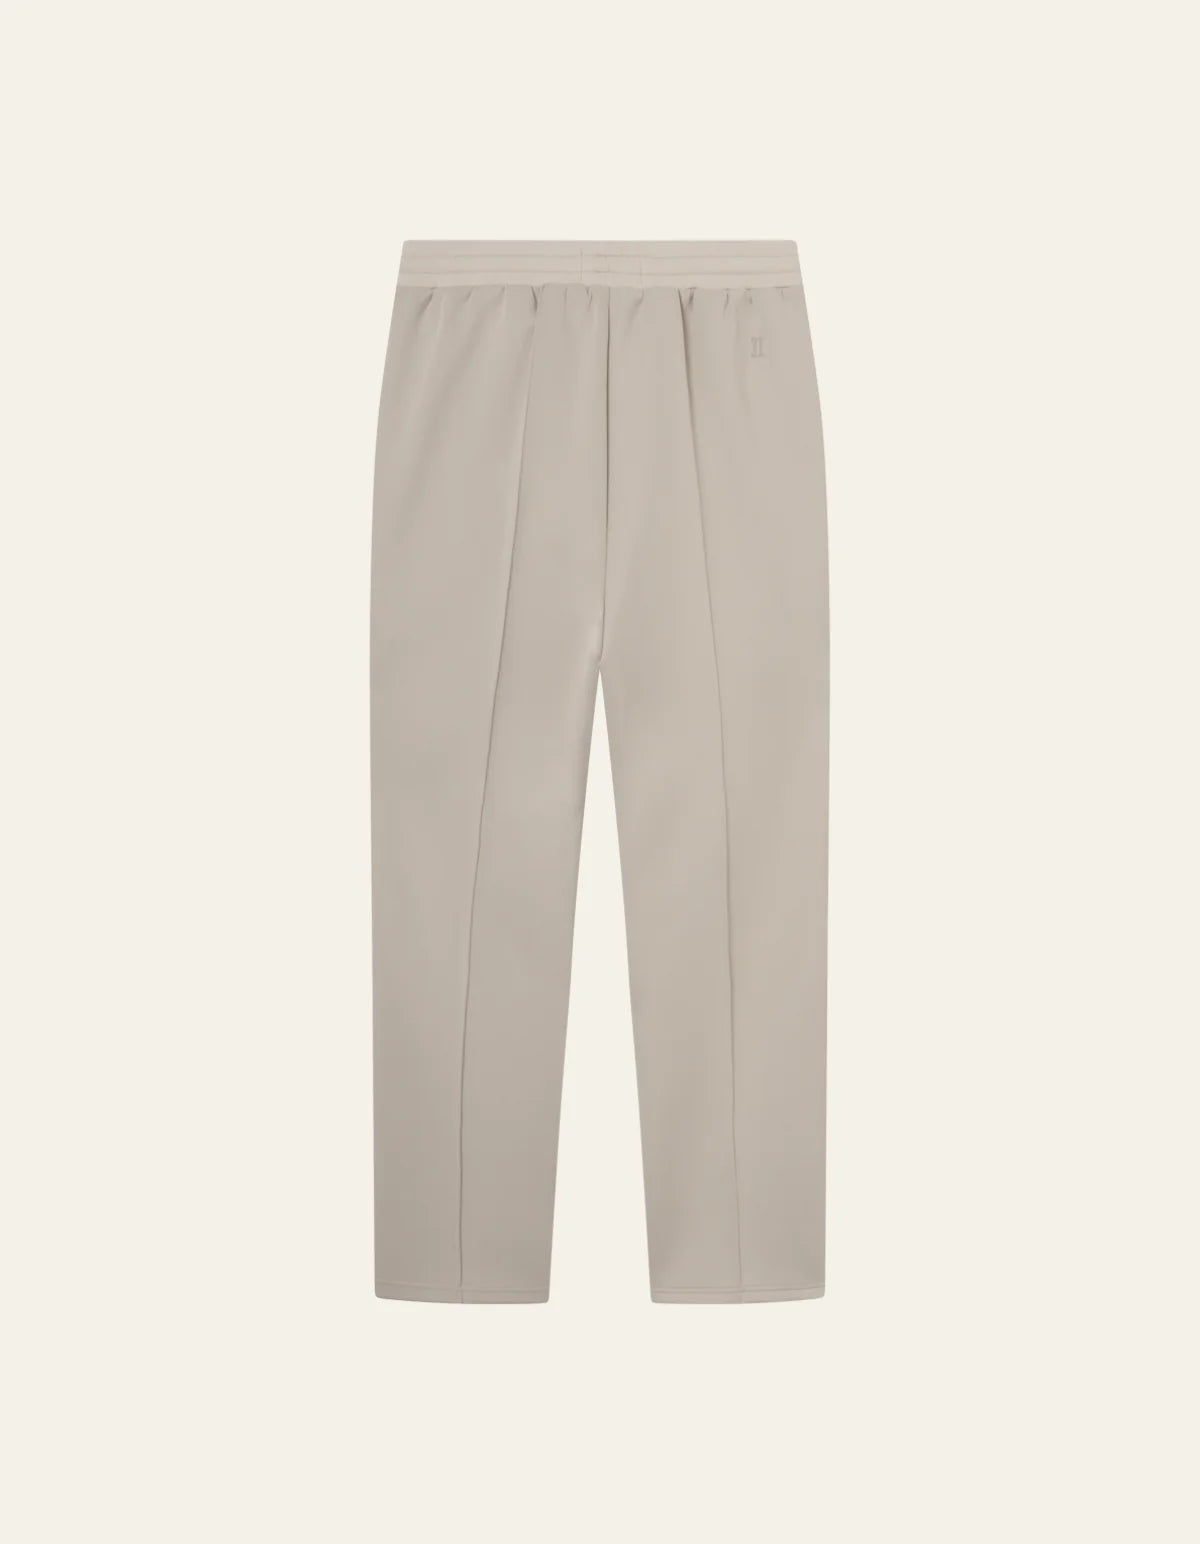 BALLIER CASUAL TRACK PANTS